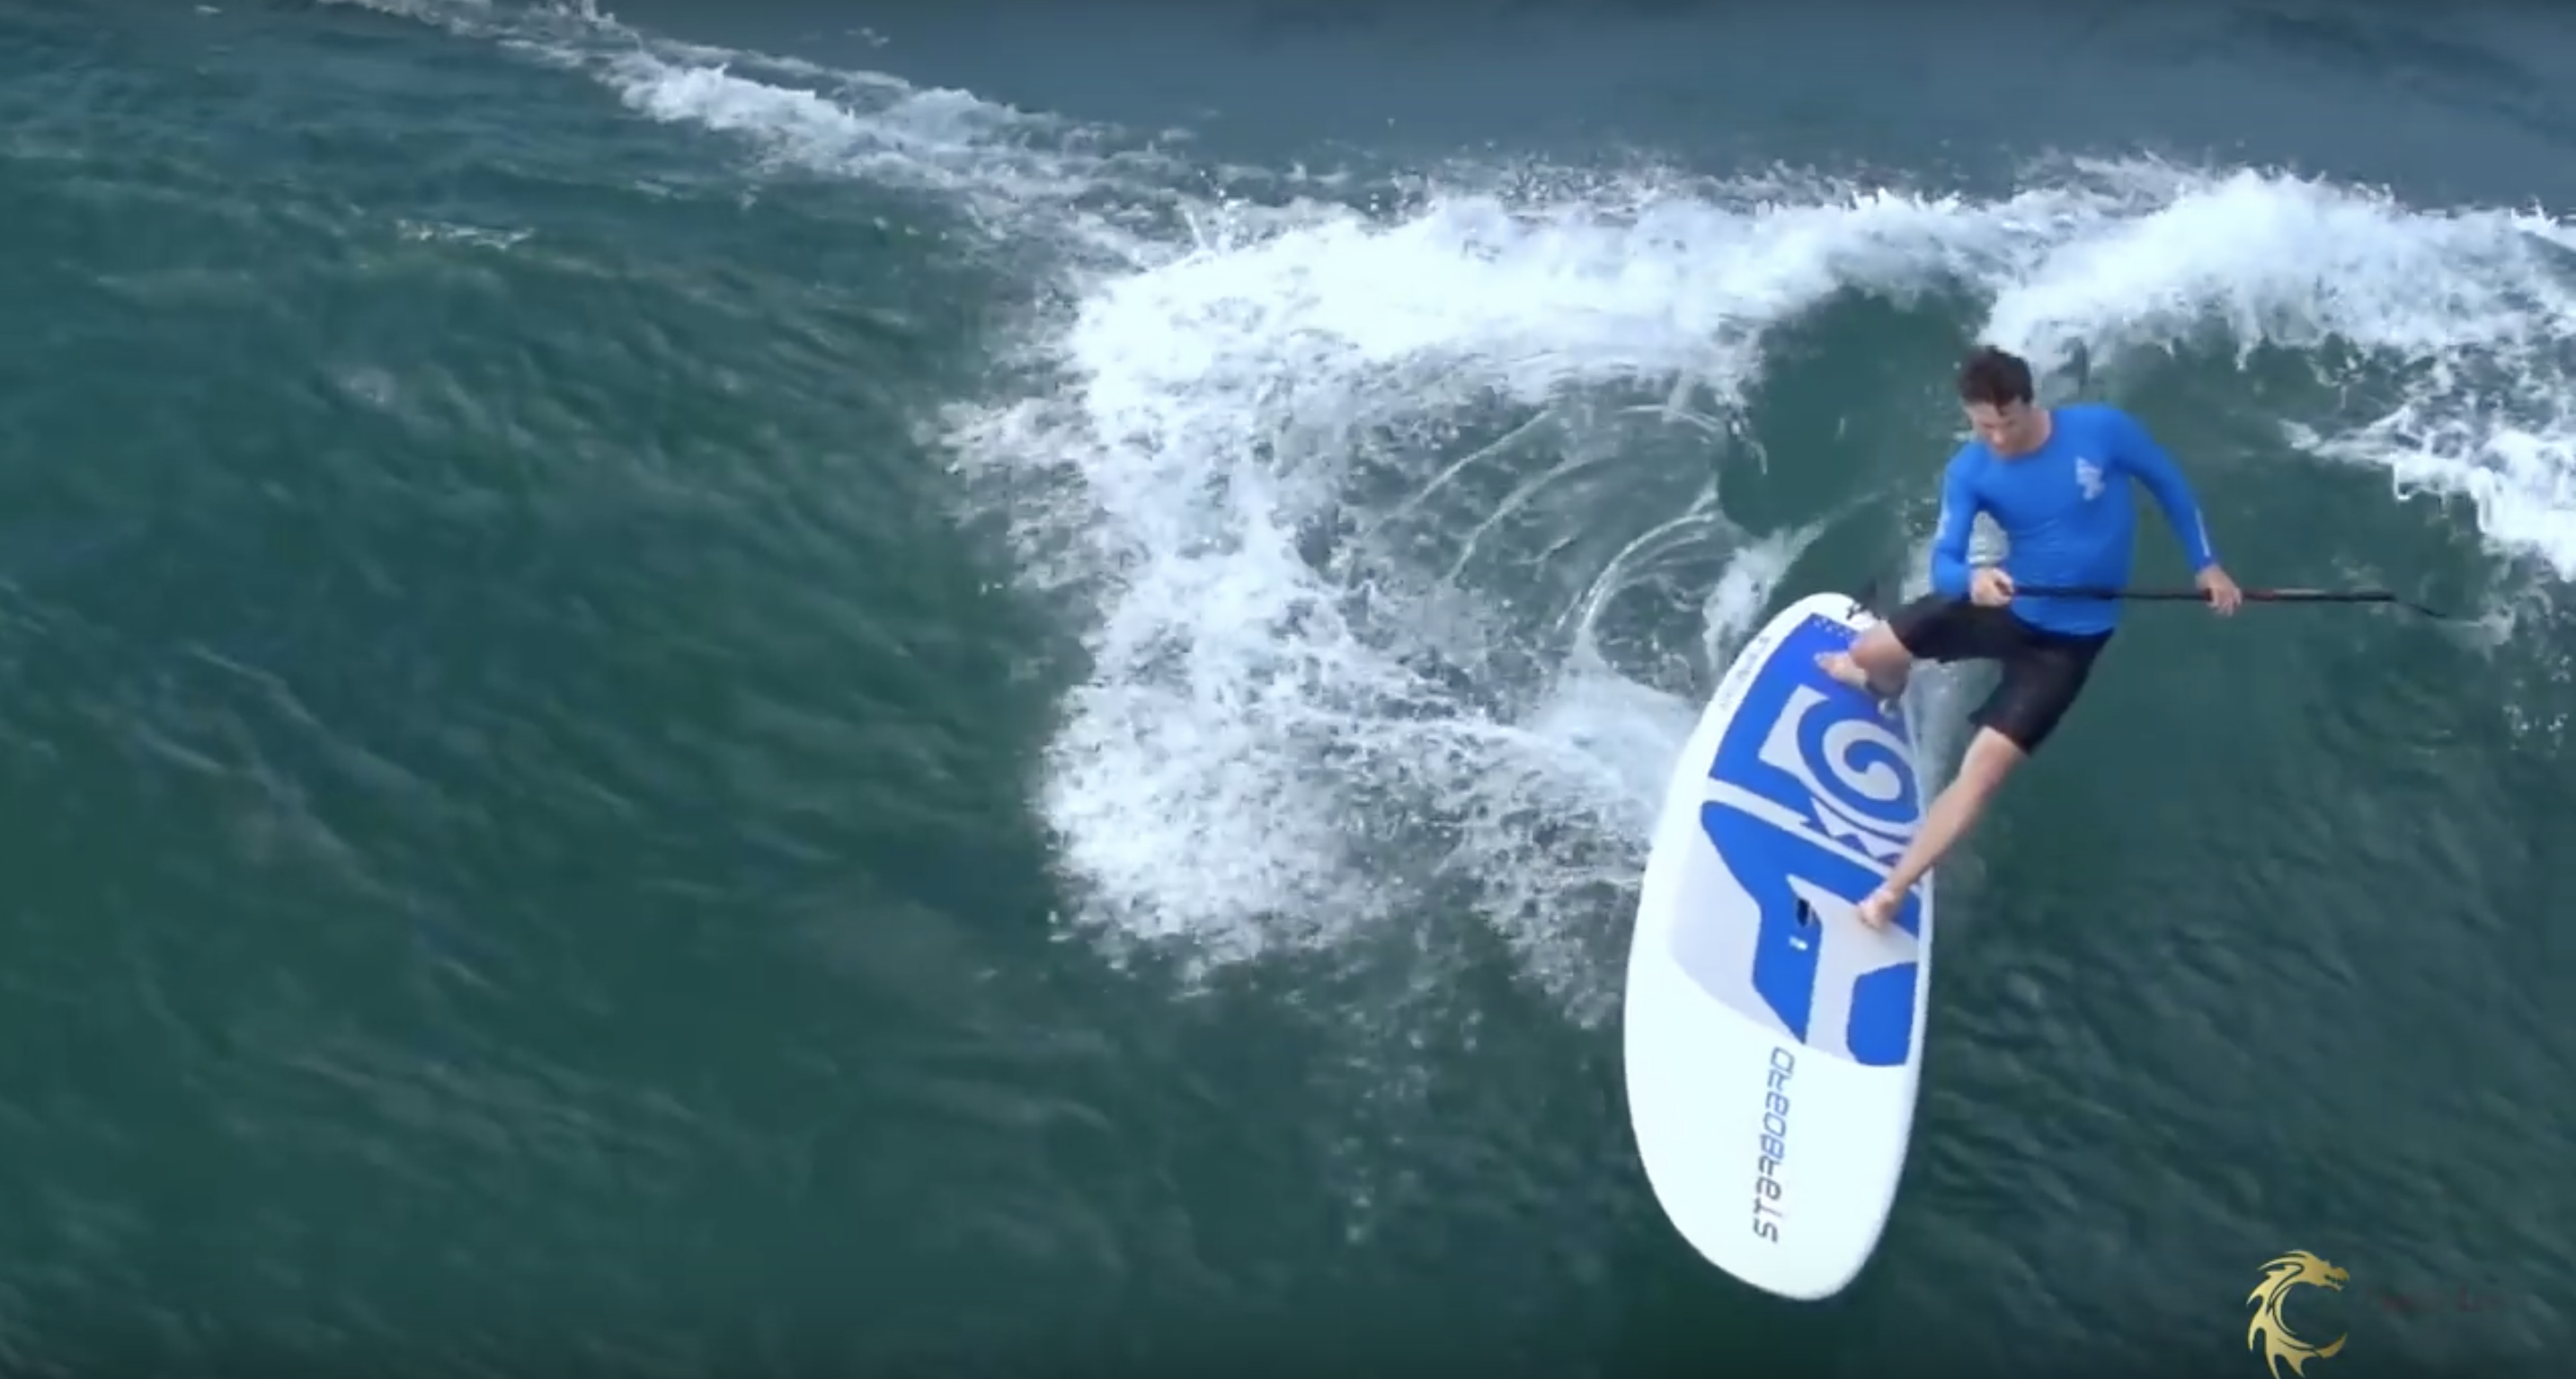 Surfing Pro Highlights in Maui, Hawaii